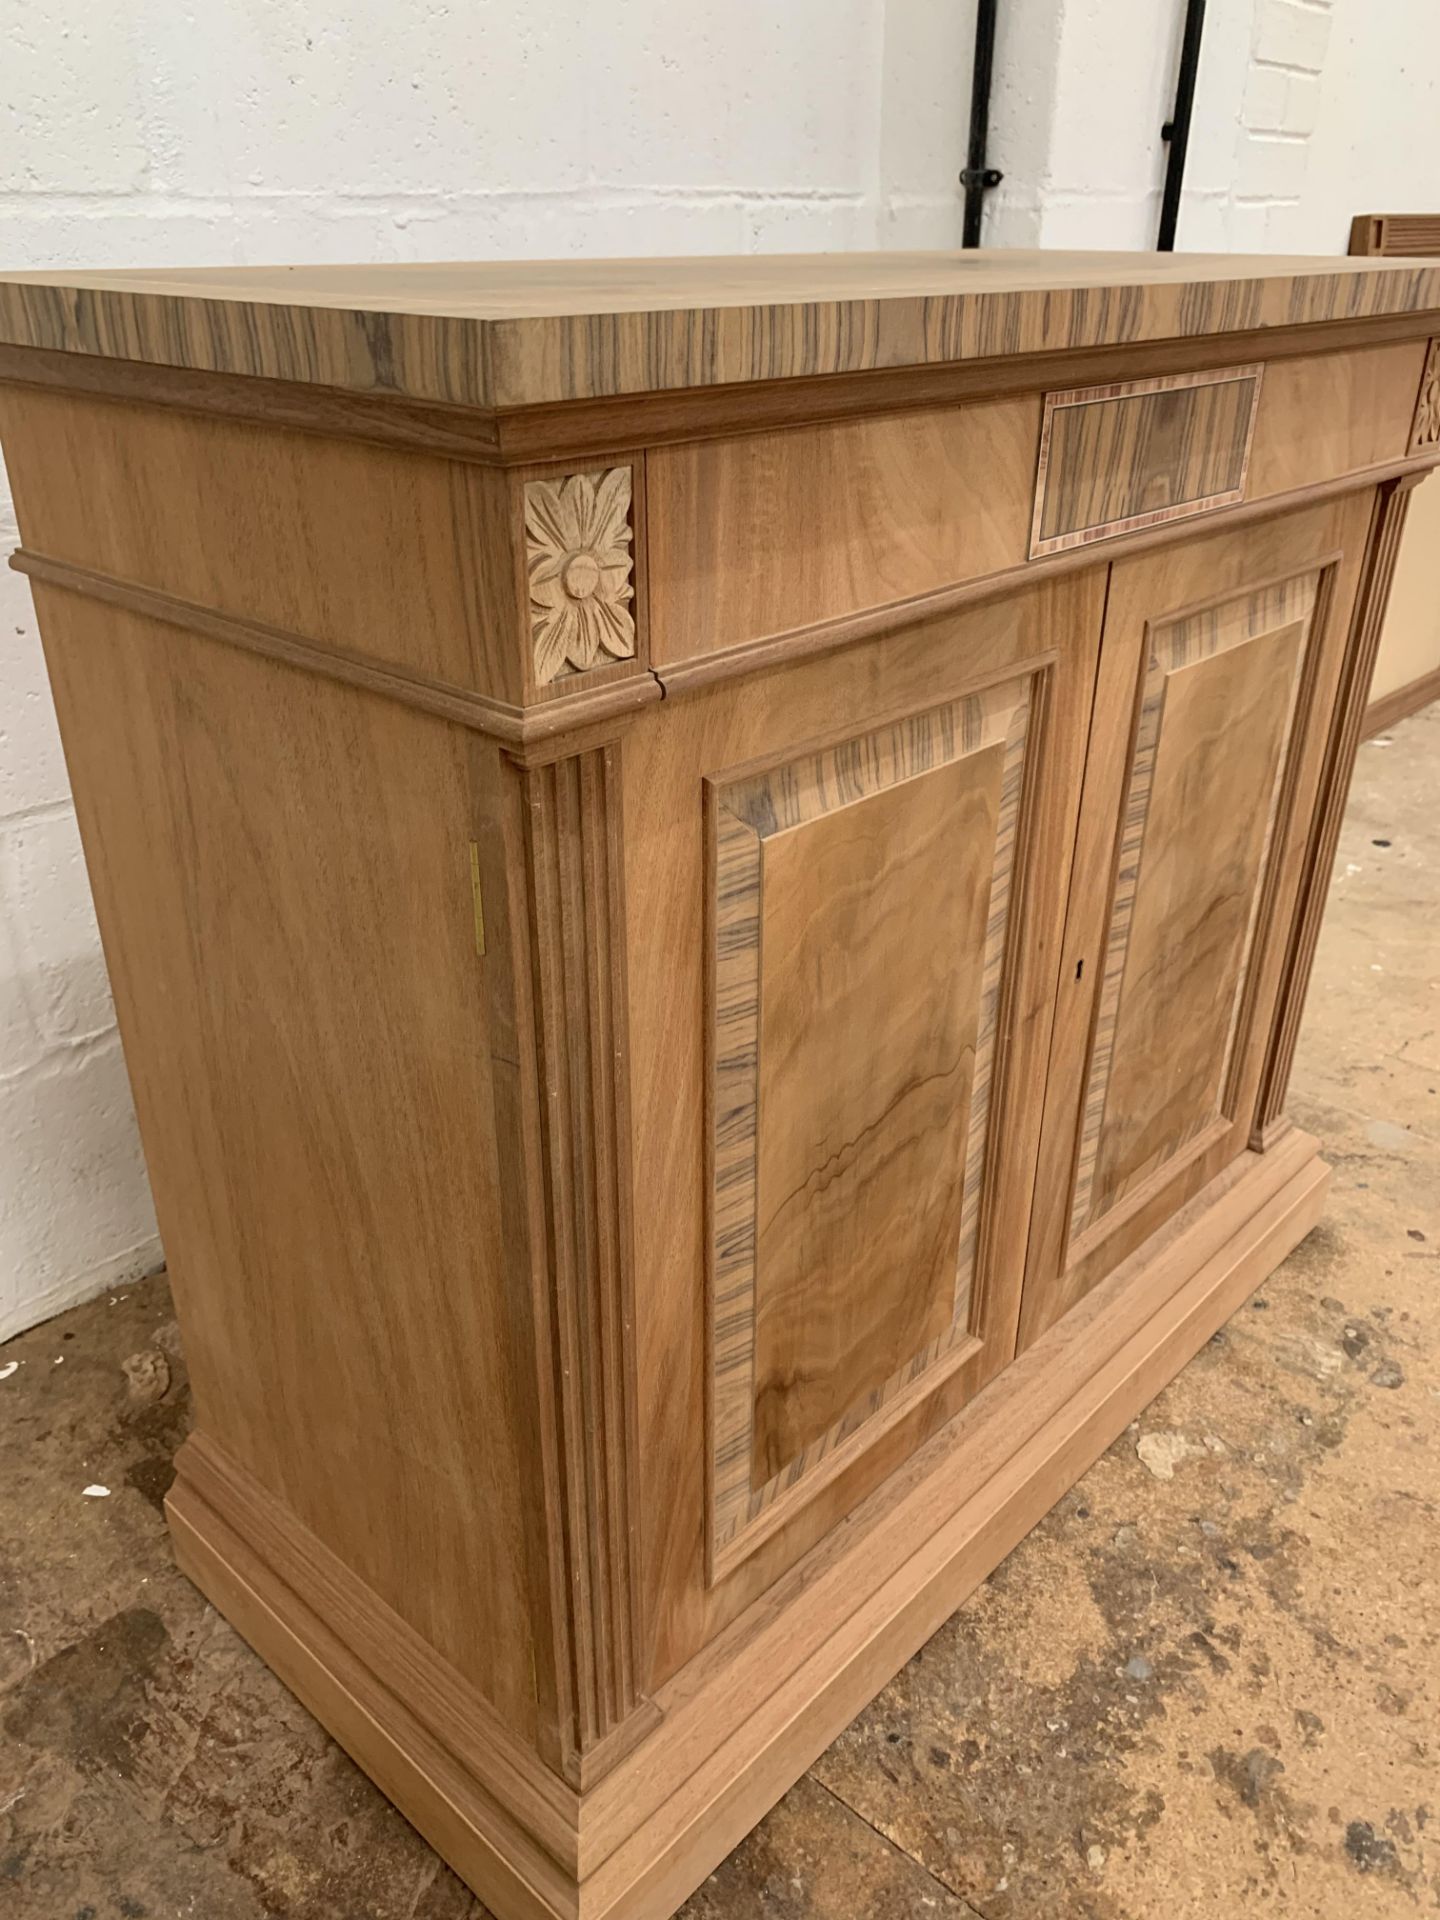 Small two-door Sideboard, in Mahogany finish, from the Corinthian range, requires finishing/ - Image 4 of 5